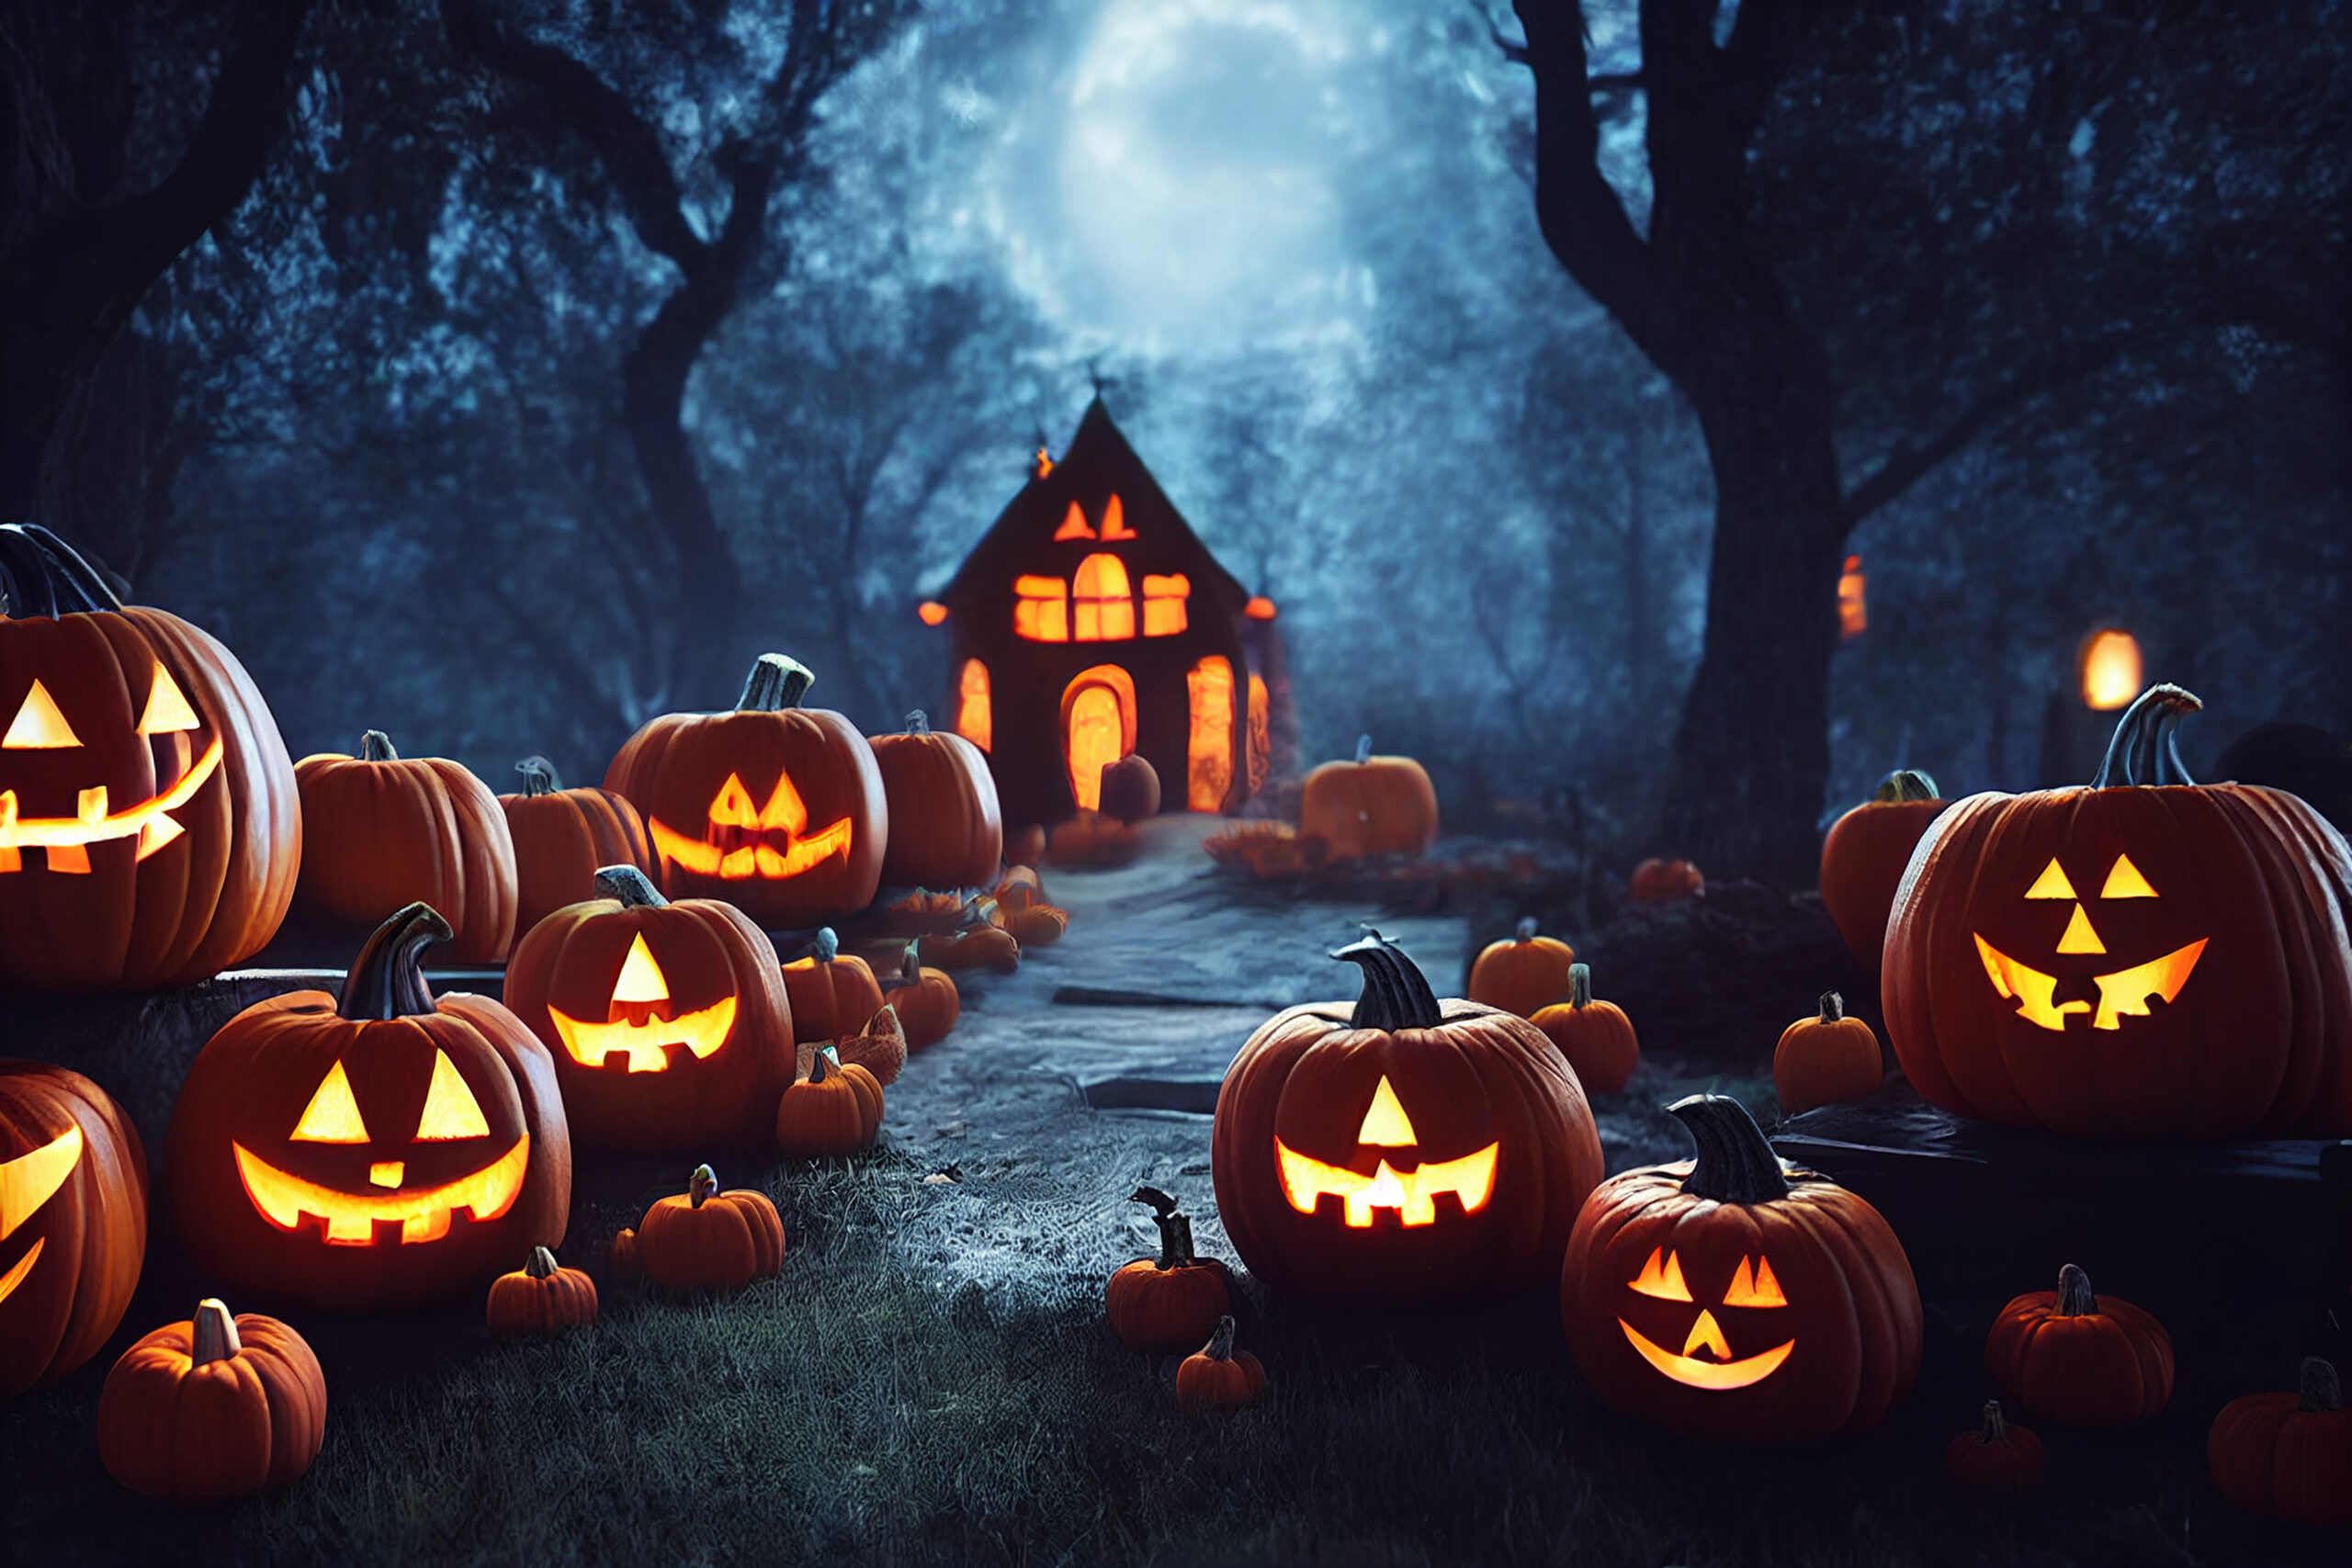 haunted house and carved pumpkins